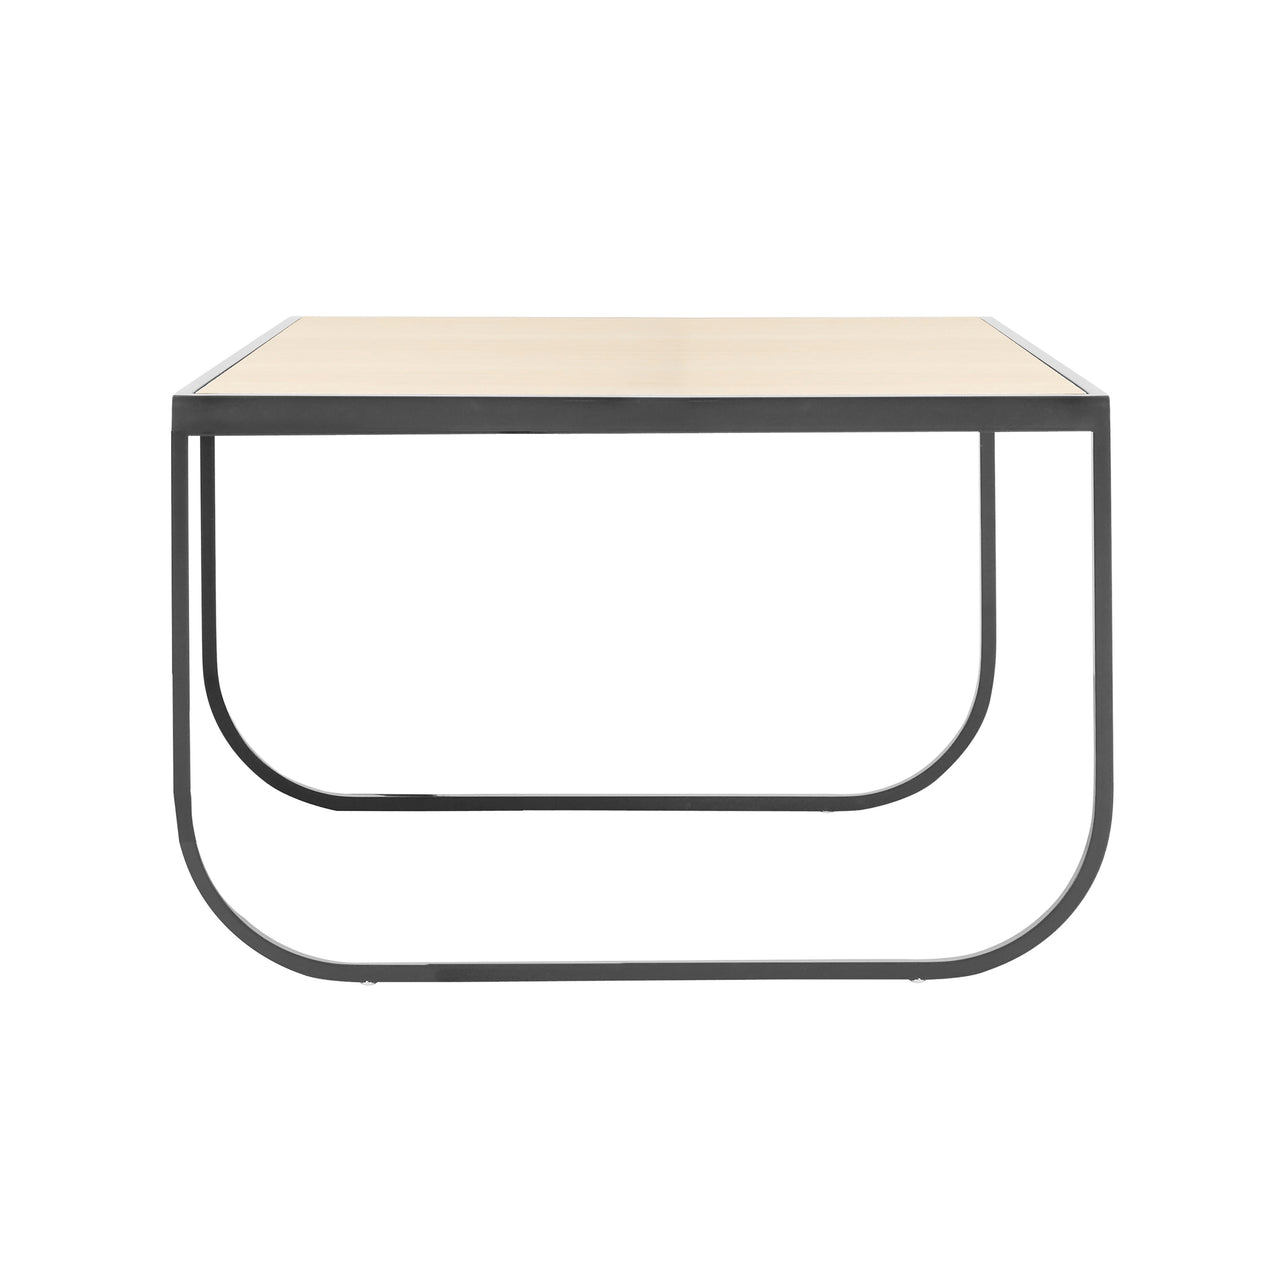 Tati Coffee Table: Square + Wood Top + Low + White Stained Oak + Storm Grey